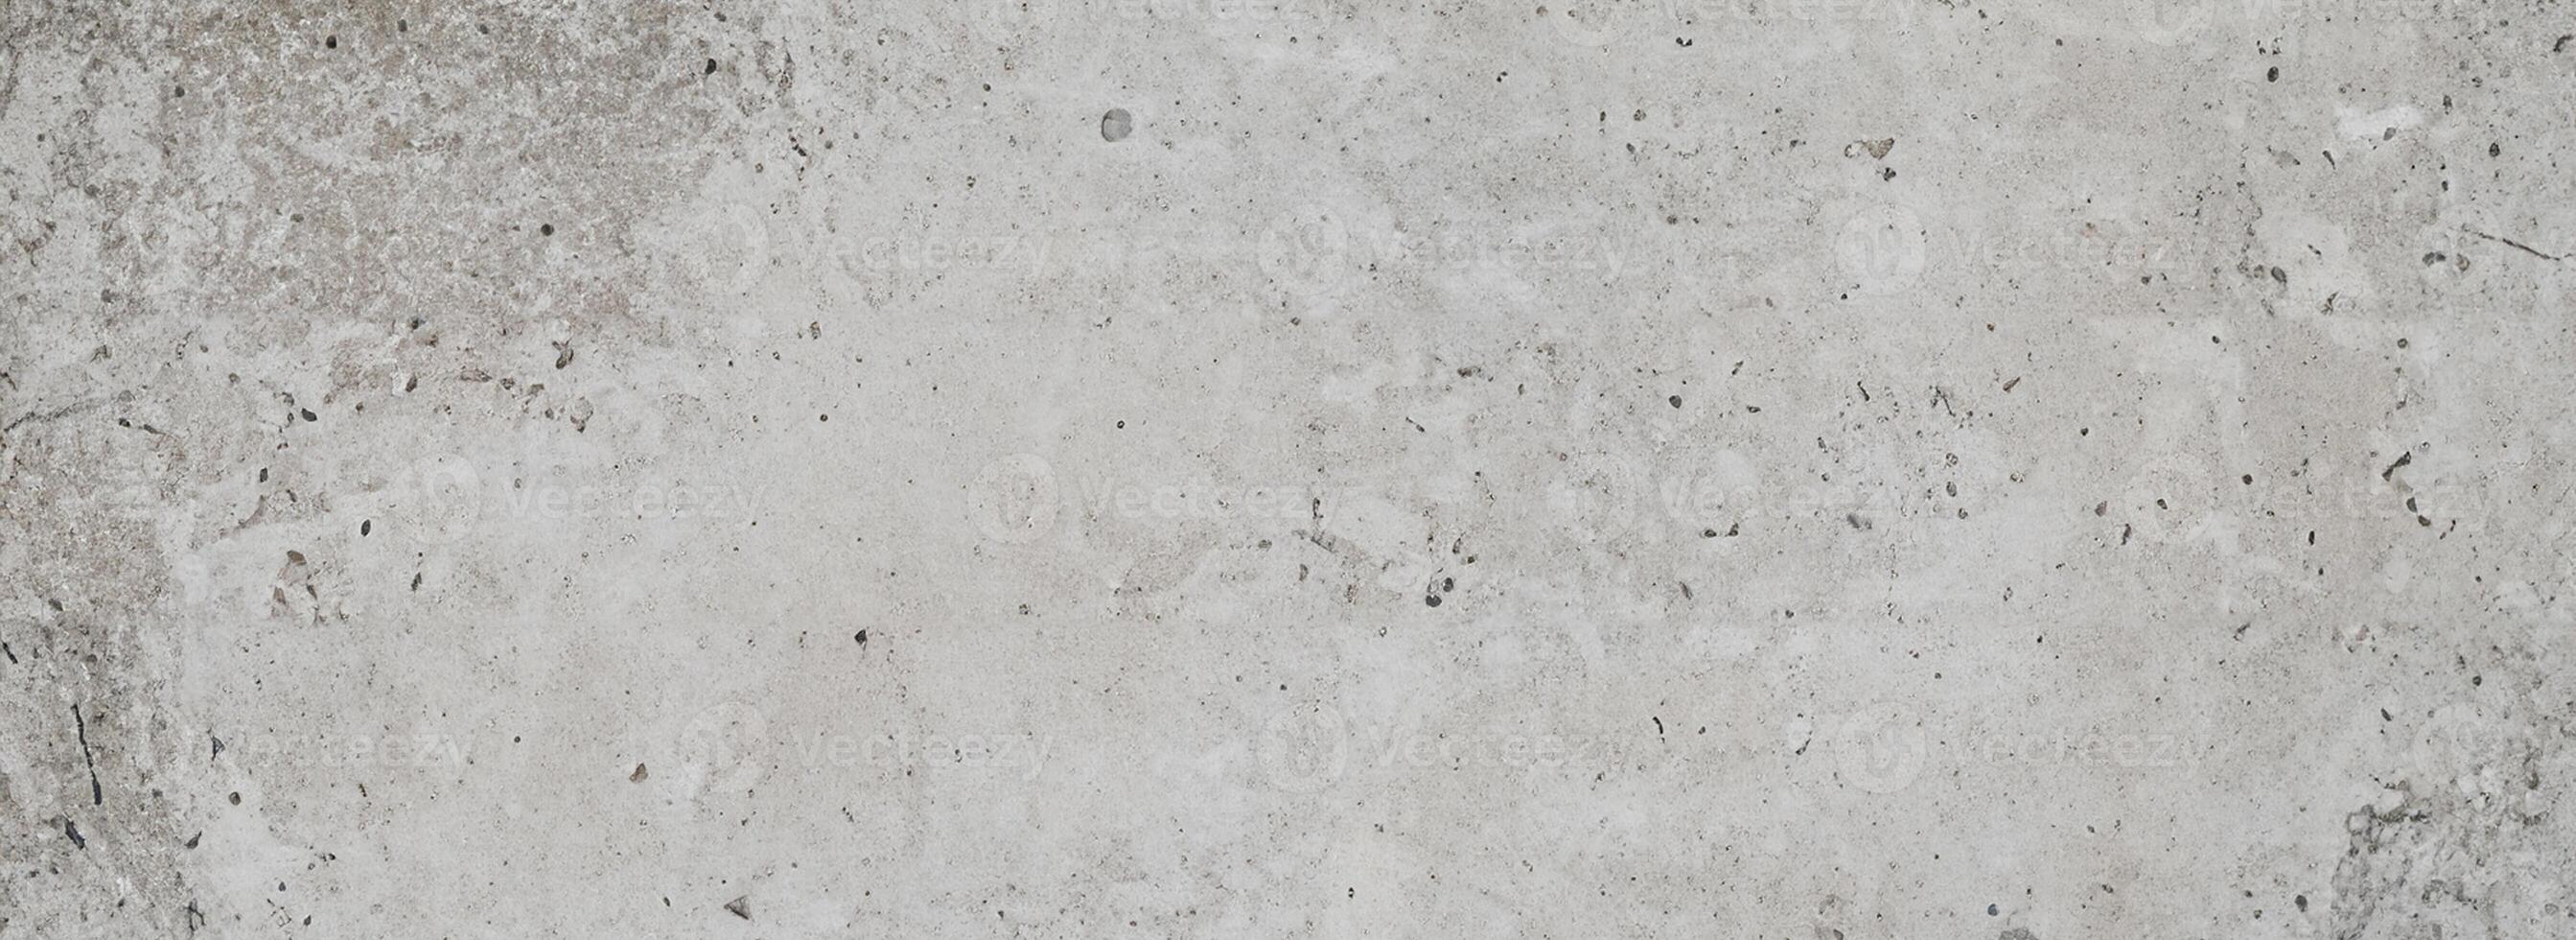 Vintage Grunge, Abstract Grey Concrete Wall Texture Background. photo